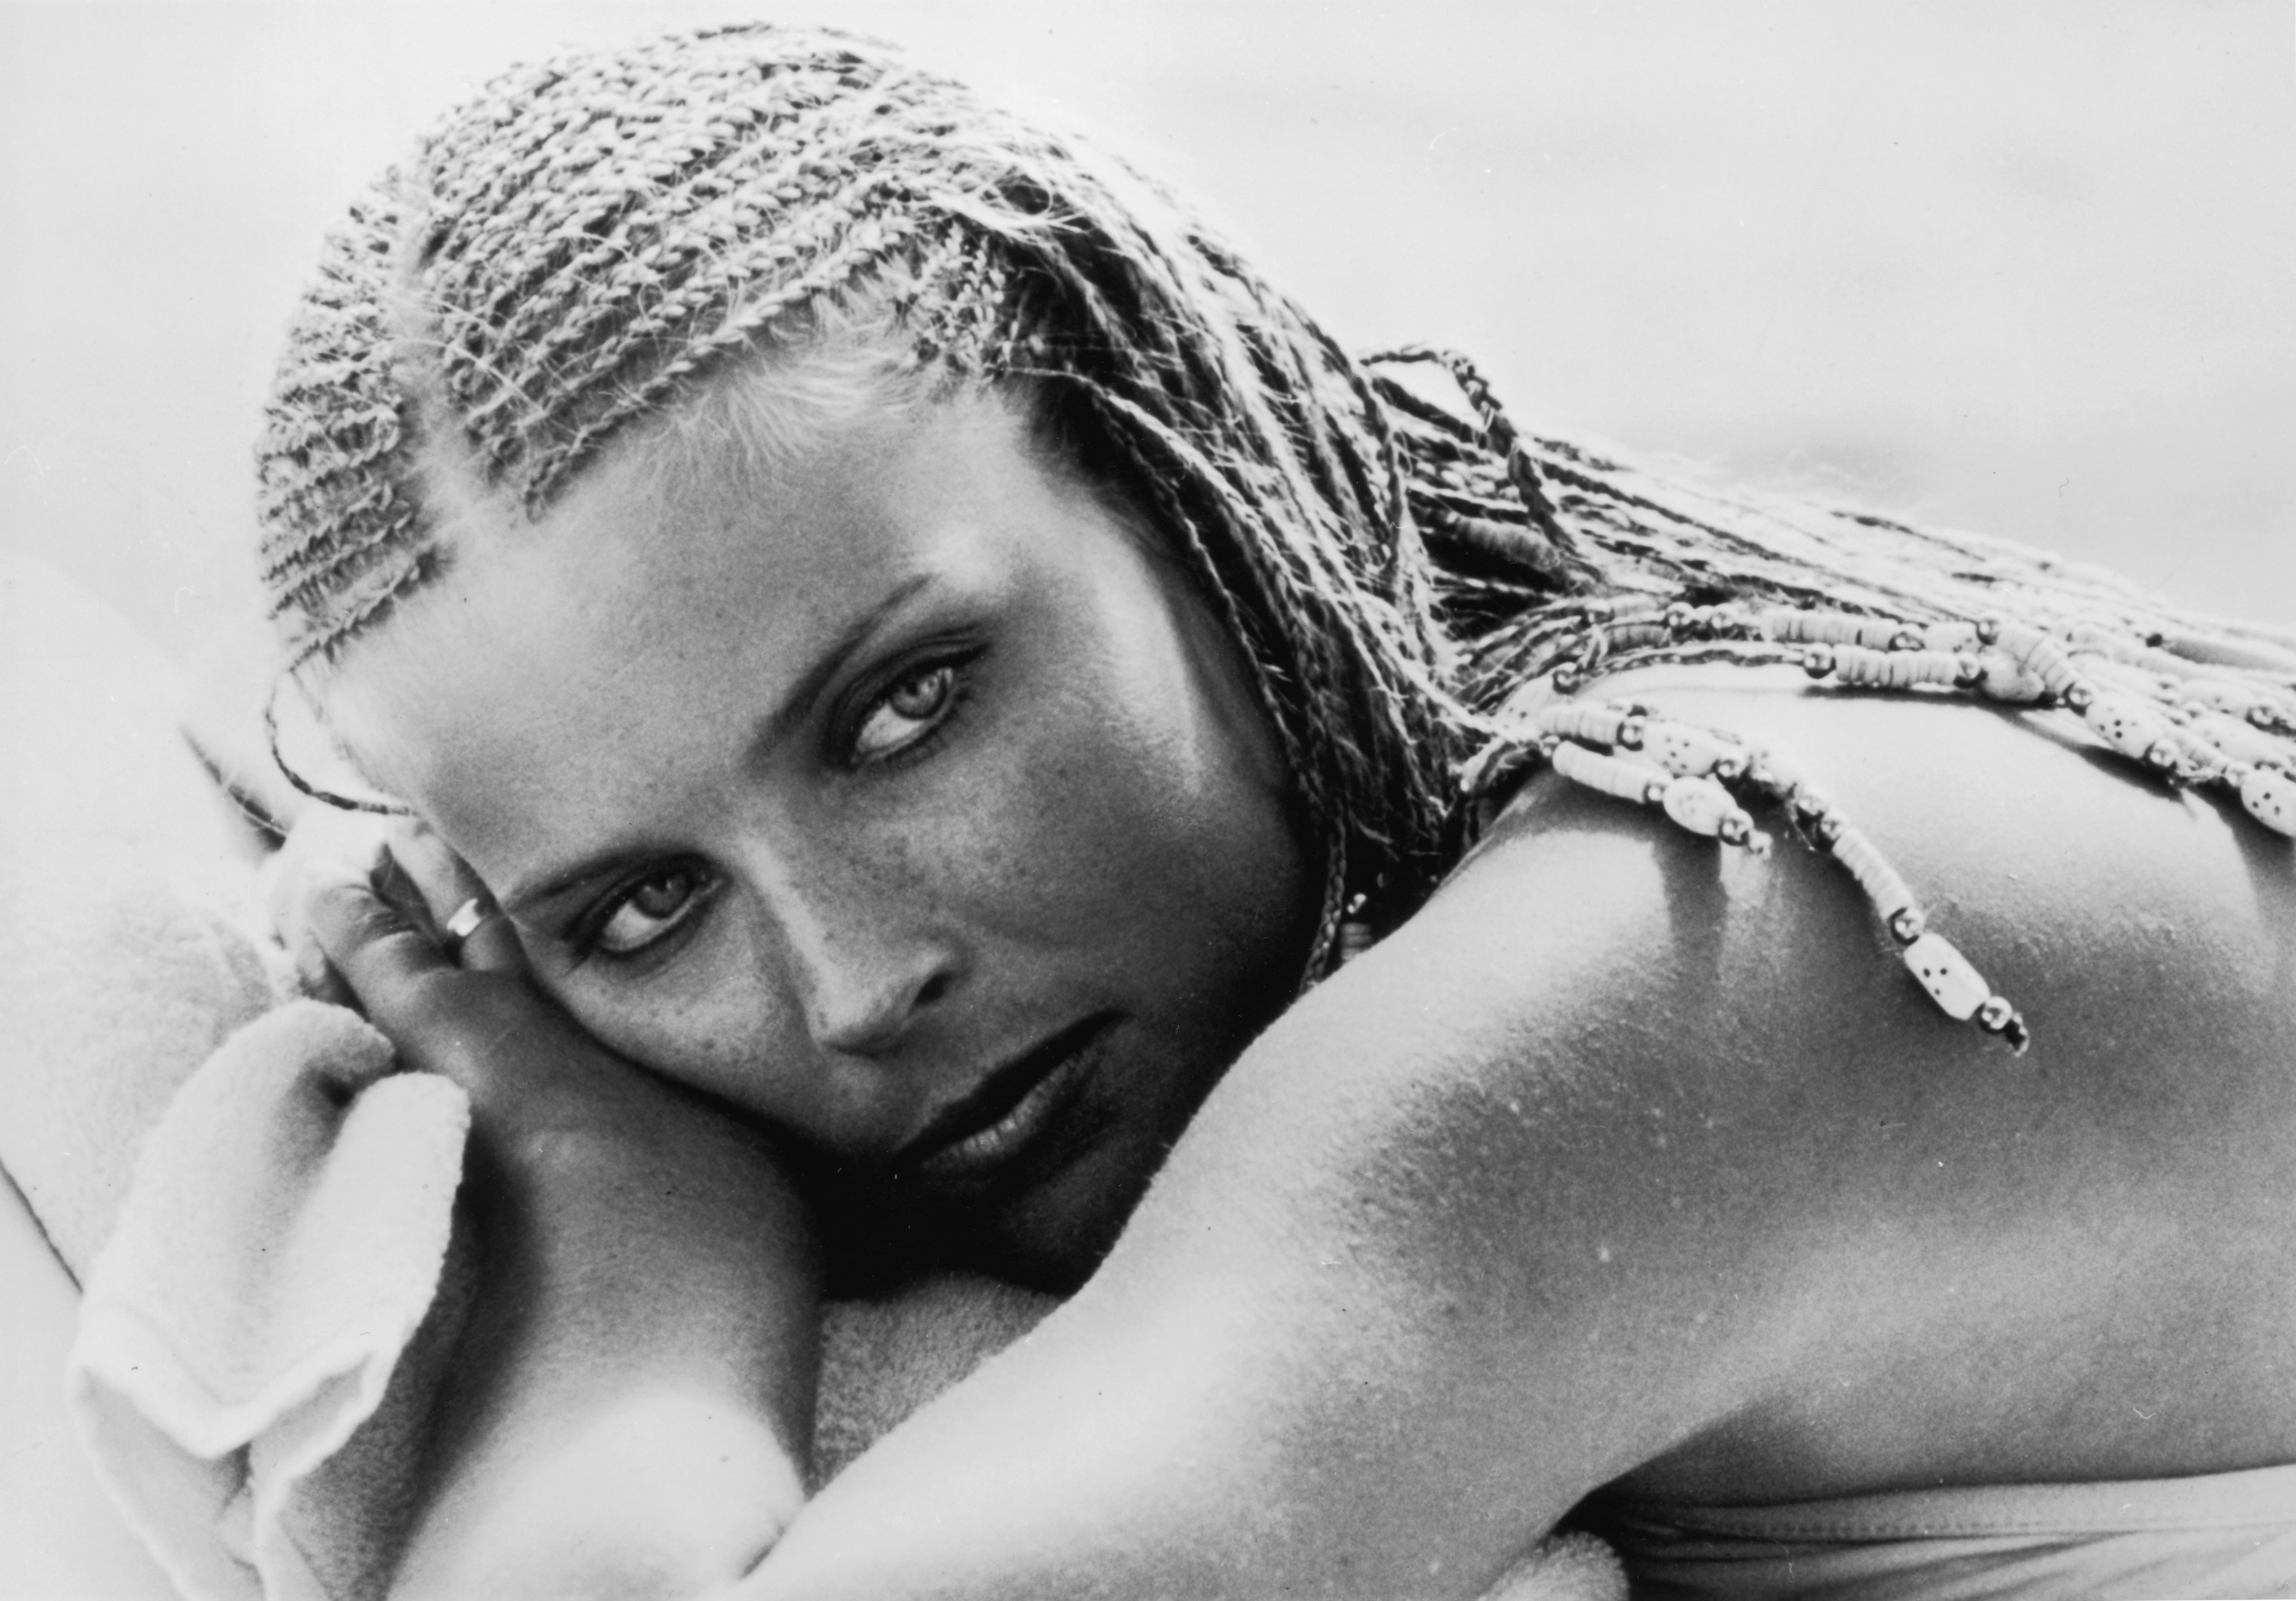 Actress Bo Derek, star of the hit comedy film '10' in 1979. | Source: Getty Images